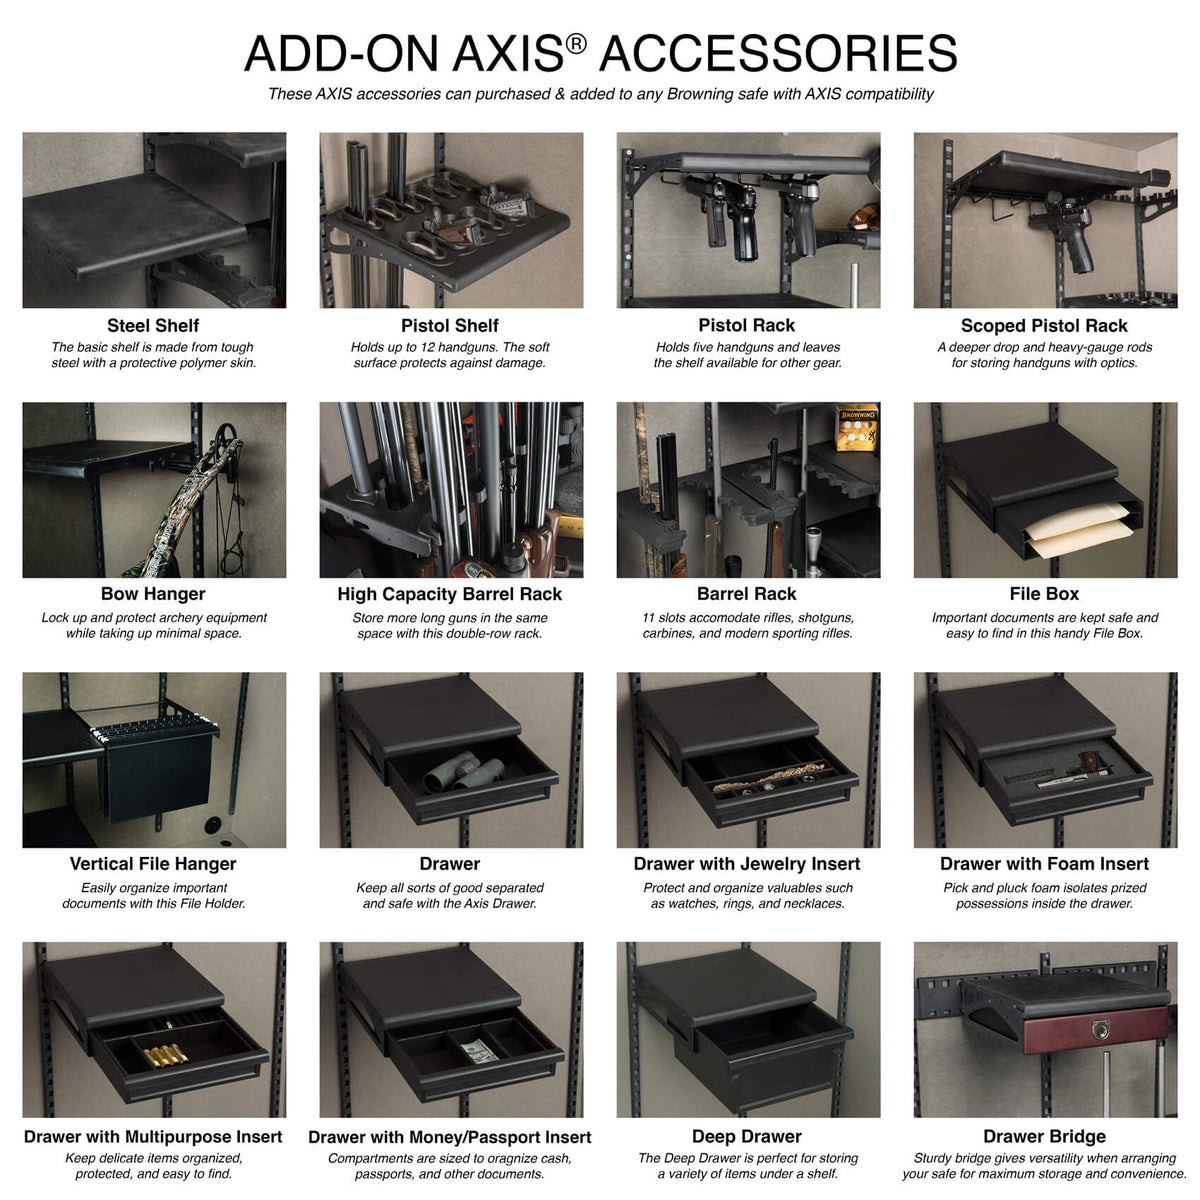 Browning AXIS Add on Accessories adjustable shelving options dean safe